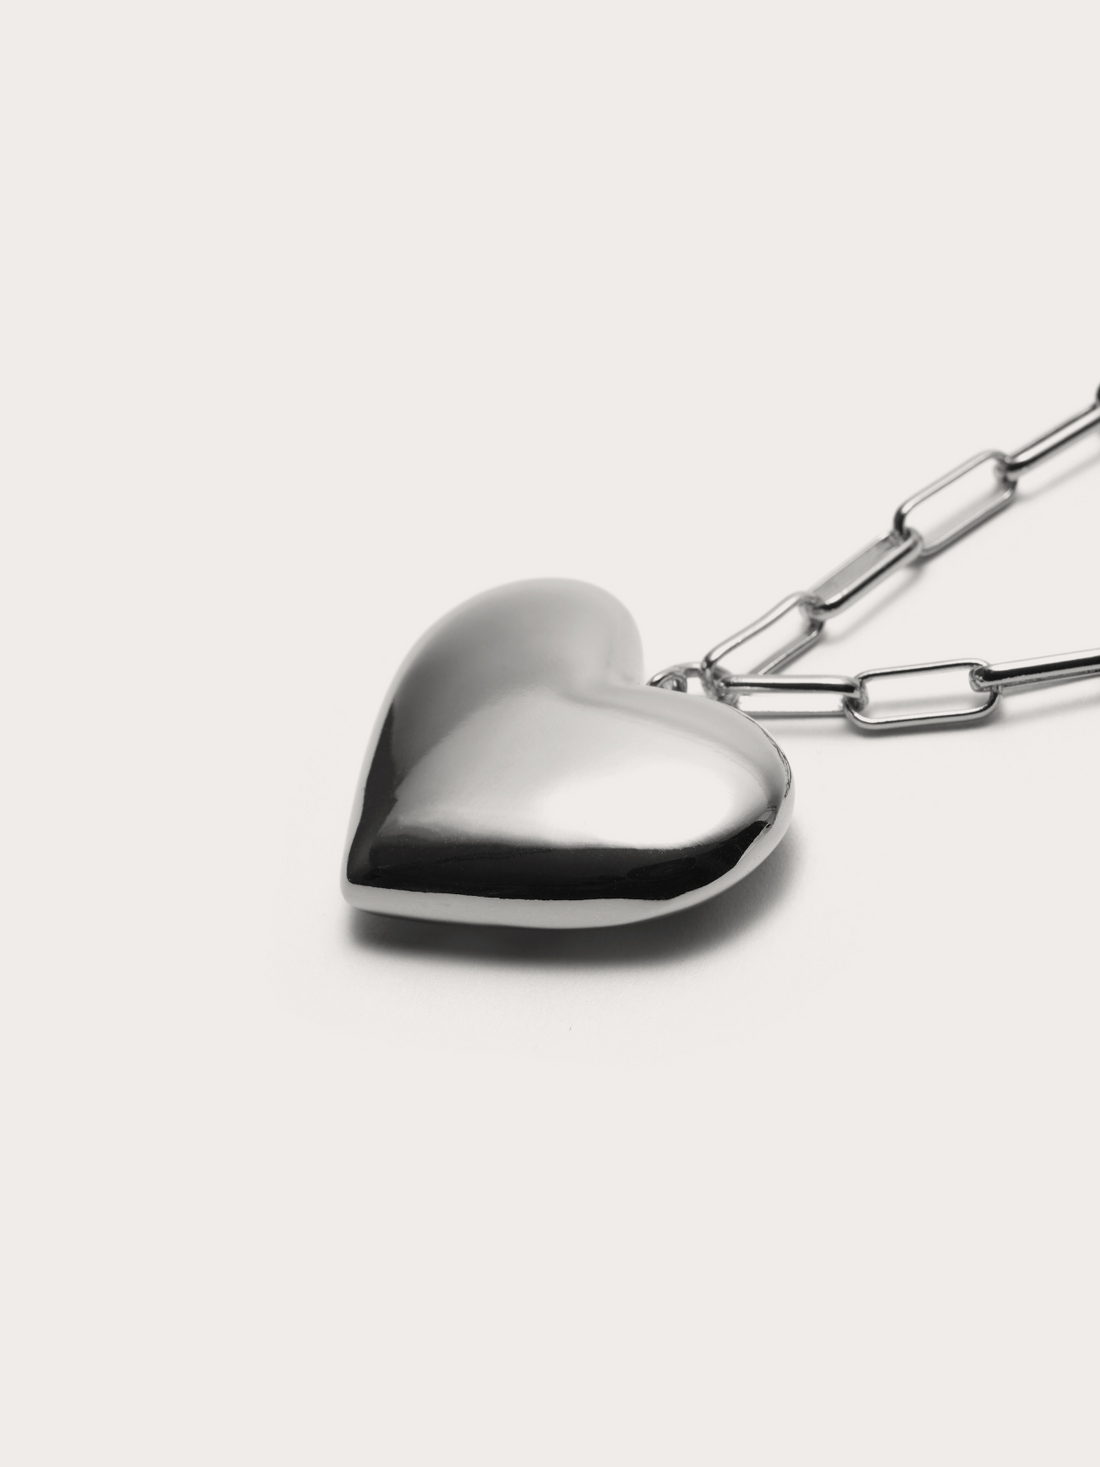 Special heart necklace